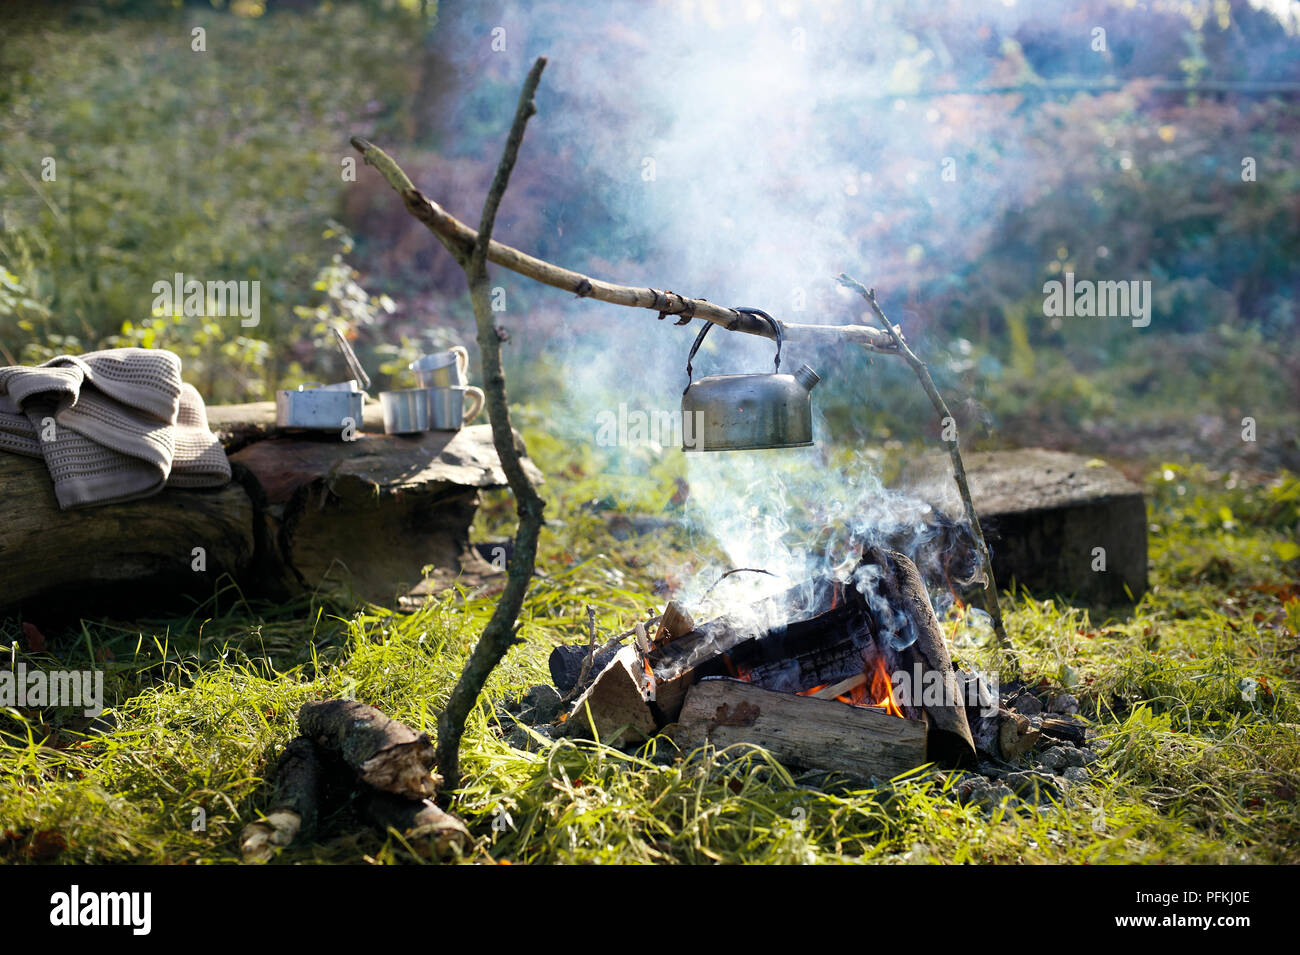 https://c8.alamy.com/comp/PFKJ0E/kettle-hanging-from-branch-frame-by-handle-above-burning-camp-fire-on-grass-PFKJ0E.jpg